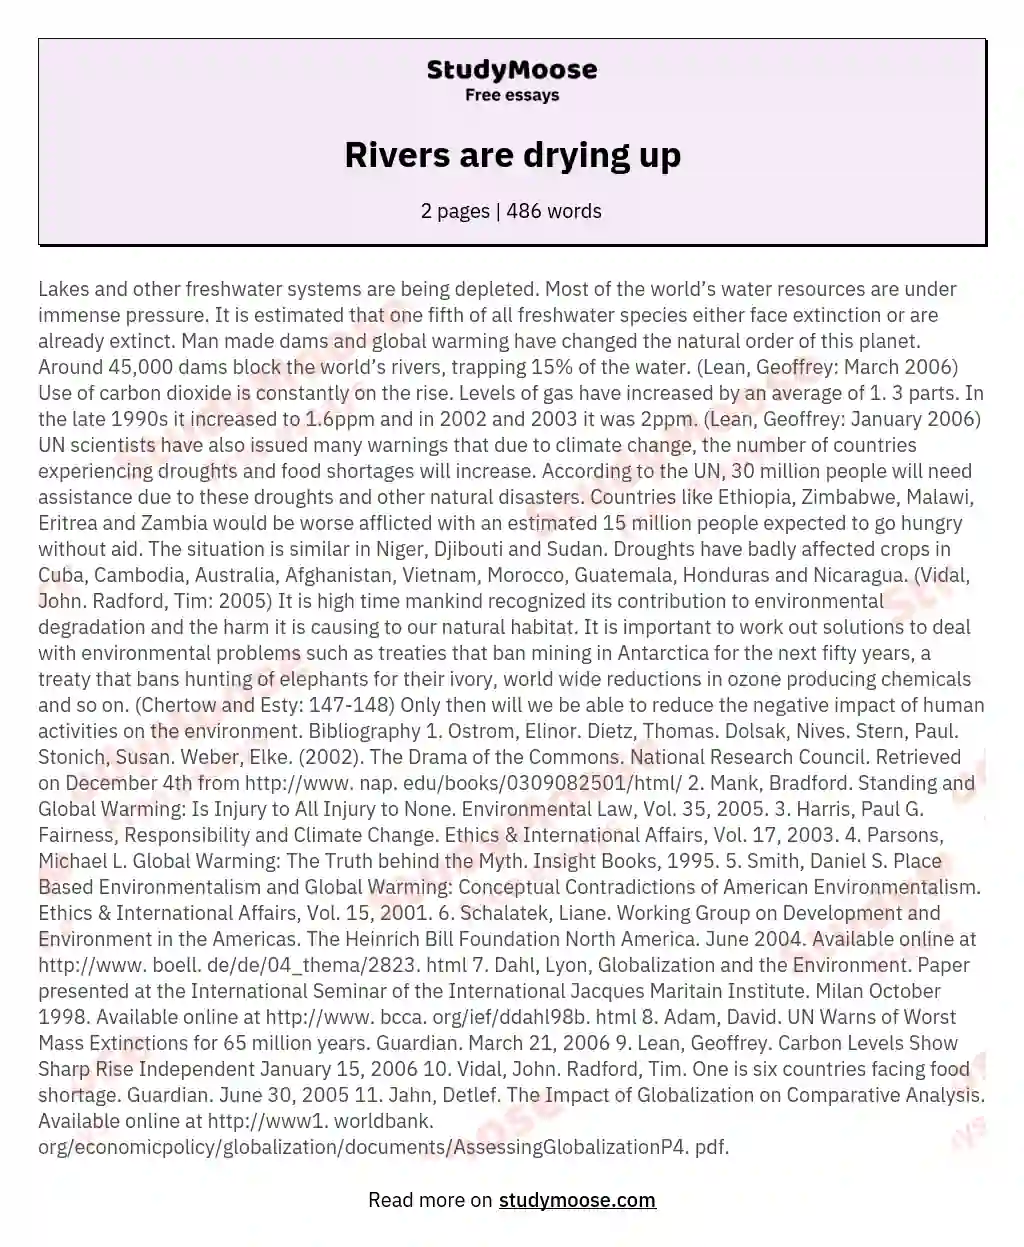 Rivers are drying up essay